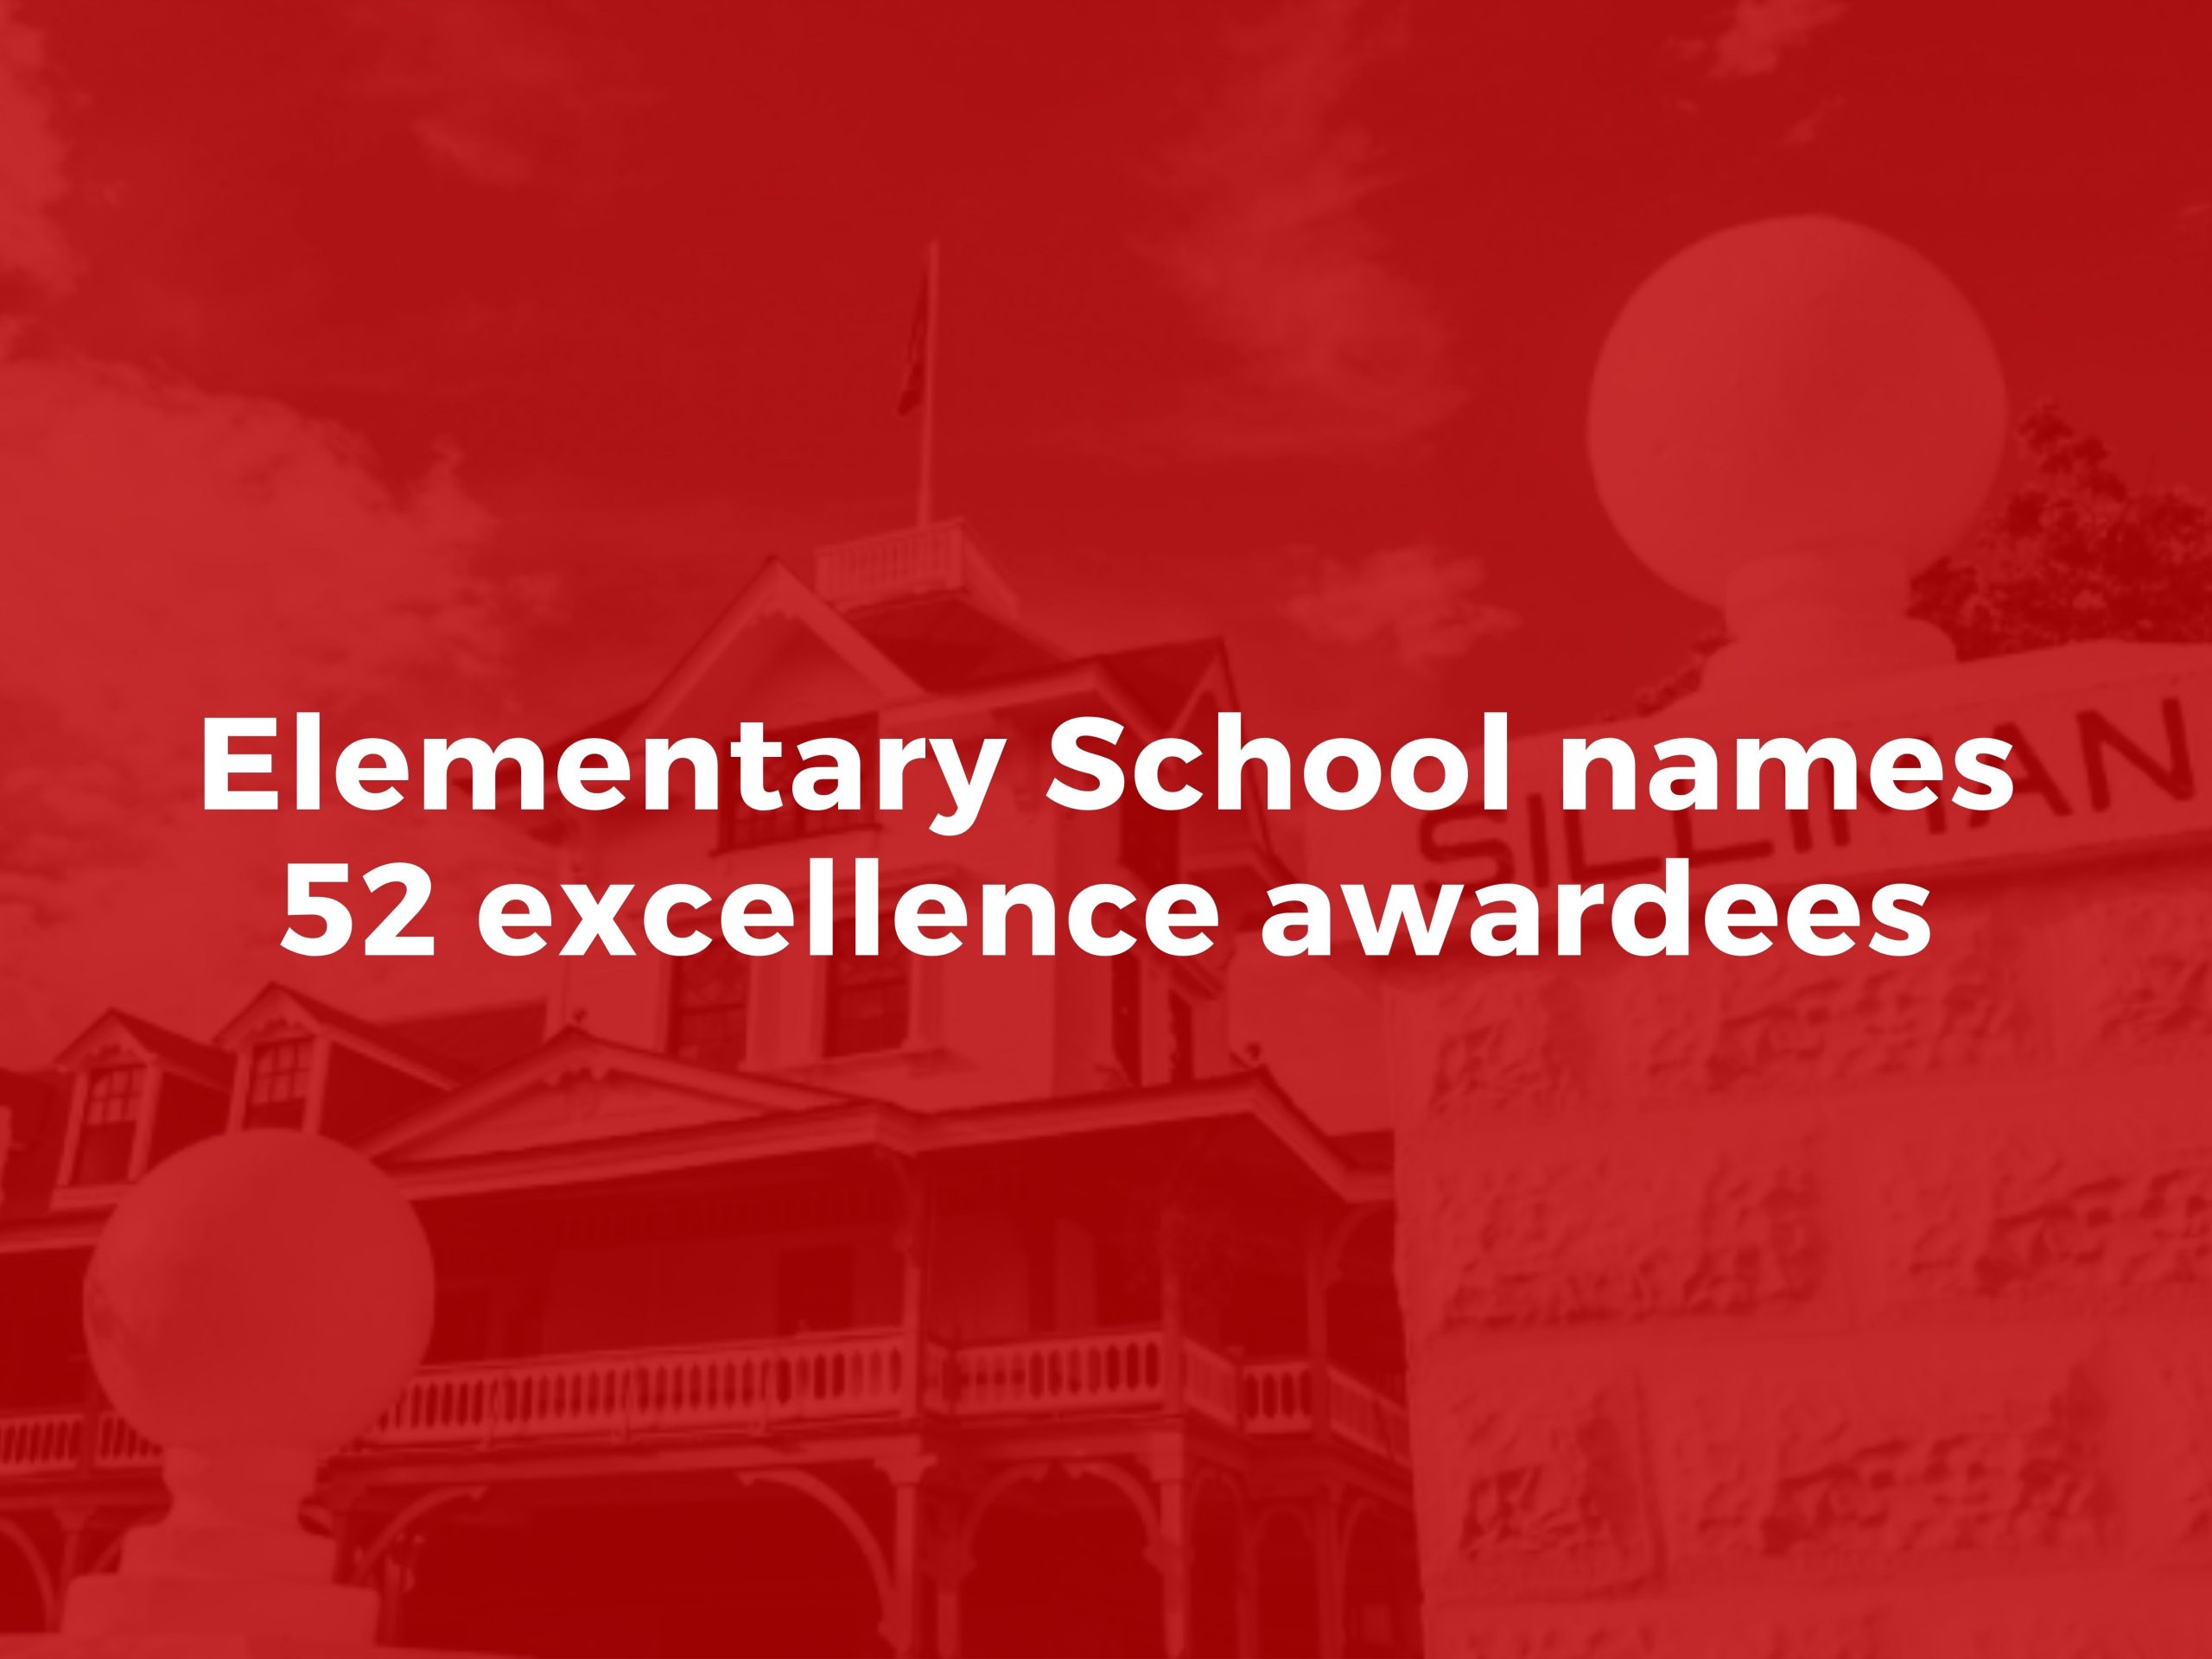 Elementary School names 52 excellence awardees